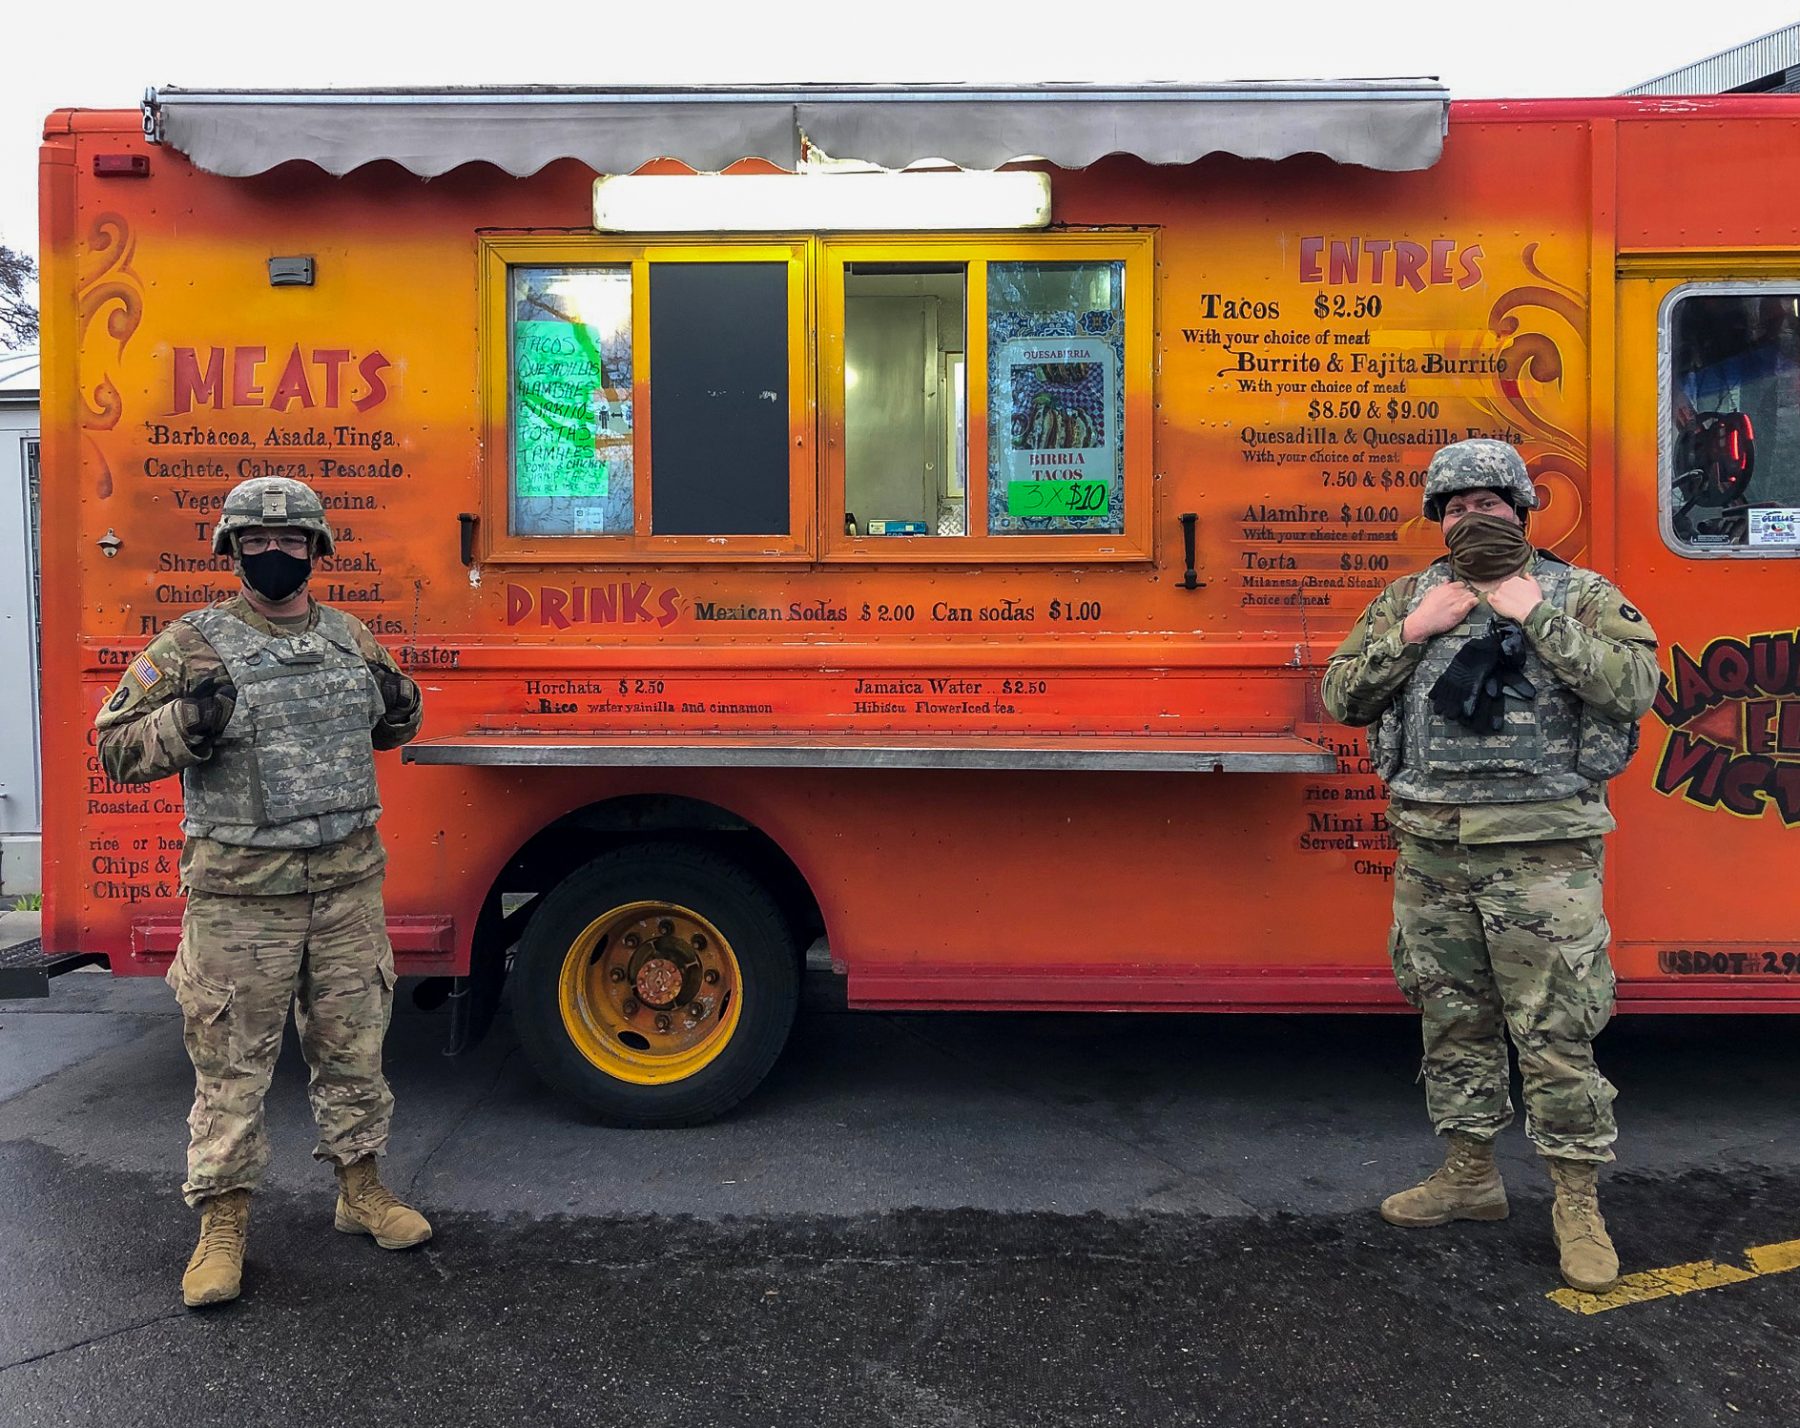 National Guard grab some tacos before their long night watch